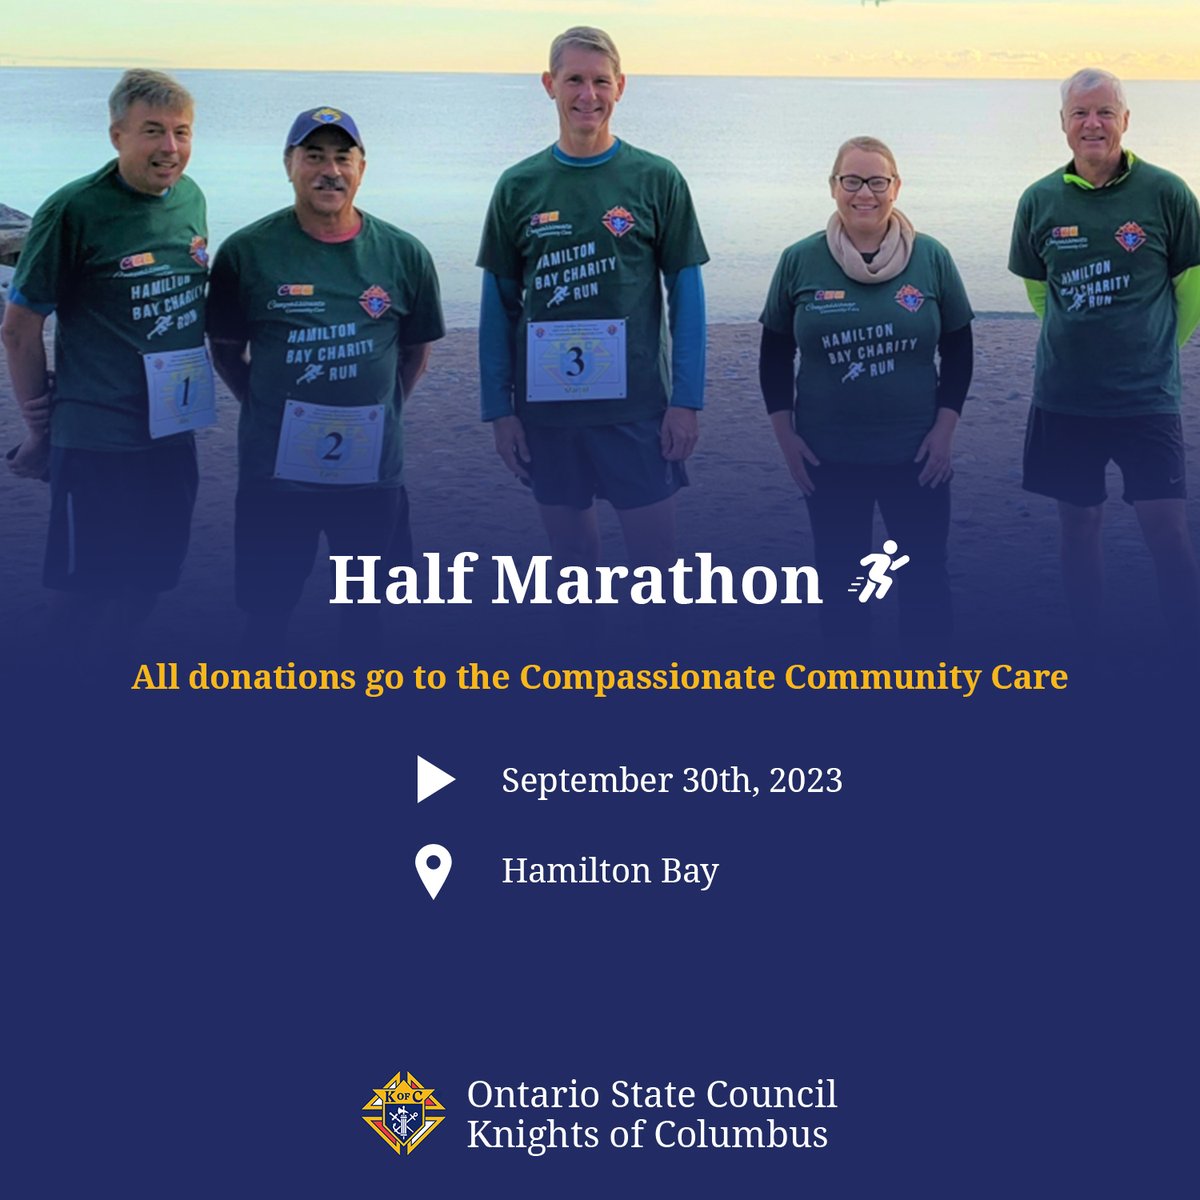 Support the Knights of Columbus Ontario Charity Run!🏃‍♀️🏃
All donations go to #CompassionateCommunityCare🏠

To donate online, visit ontariokofc.ca/.../half-marat…
For more information, visit ontariokofc.ca/charity-half-m…

#KofCOntario #OntarioKofC
#HalfMarathonCharityRun
#KofC #KofCMembers